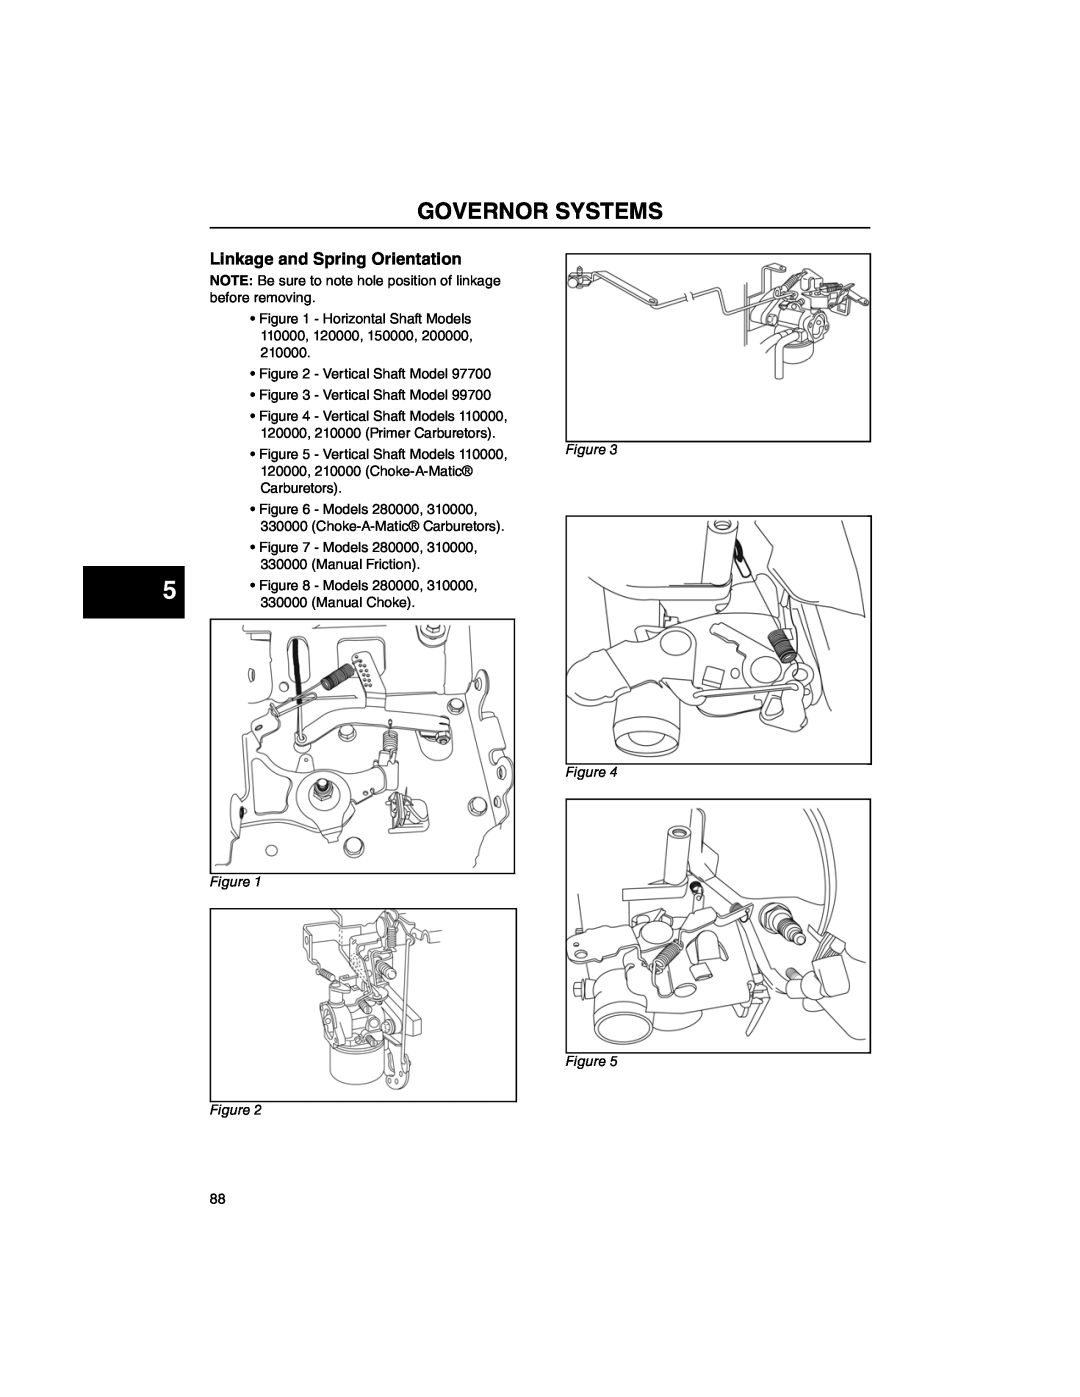 Briggs & Stratton 270962, 271172, CE8069, 276535, 273521 manual Governor Systems, Linkage and Spring Orientation 